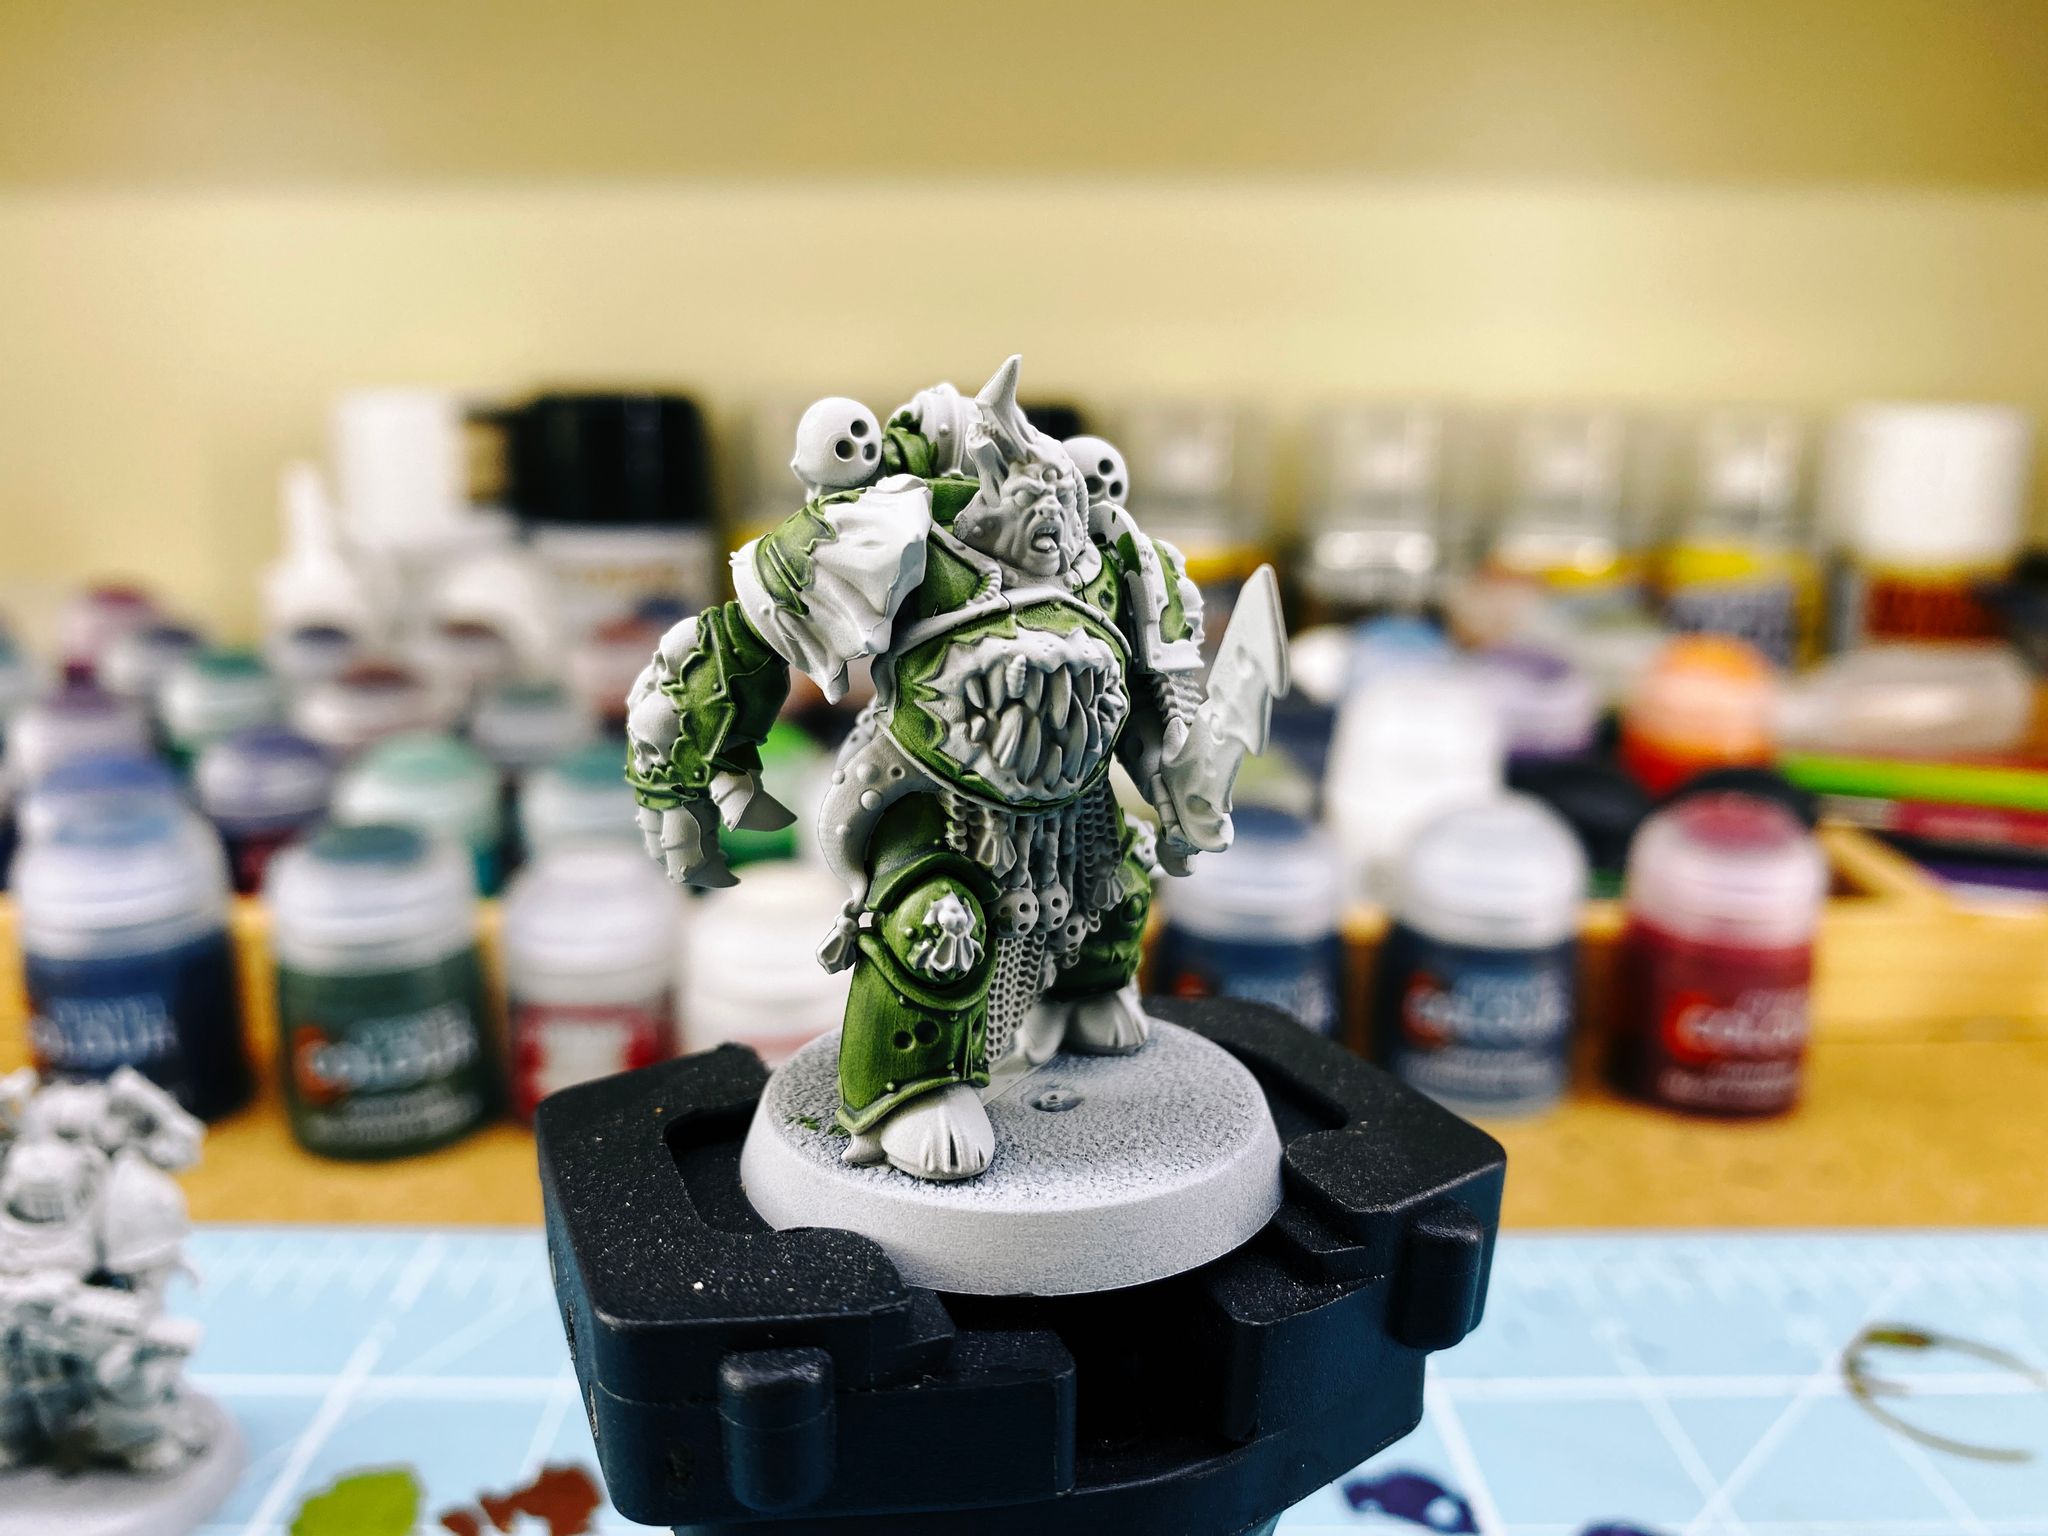 A photo of a partially painted Plague Marine from Warhammer 40,000. He's got tentacles coming out from various armour gaps, a giant mouth with teeth in it in his abdomen, and a bone spike coming out of his head.